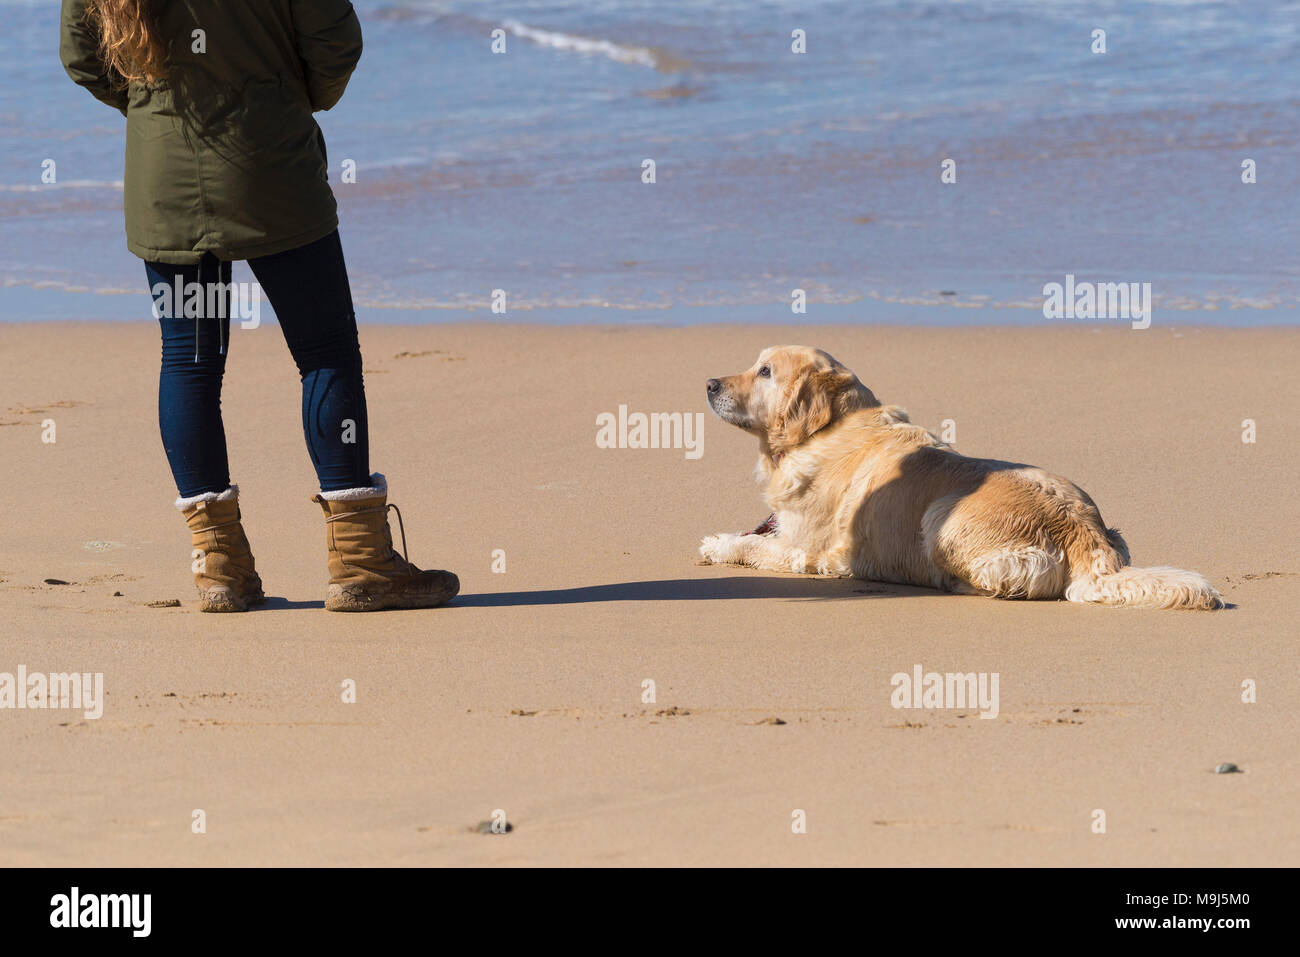 A dog on a beach looking at its owner. Stock Photo